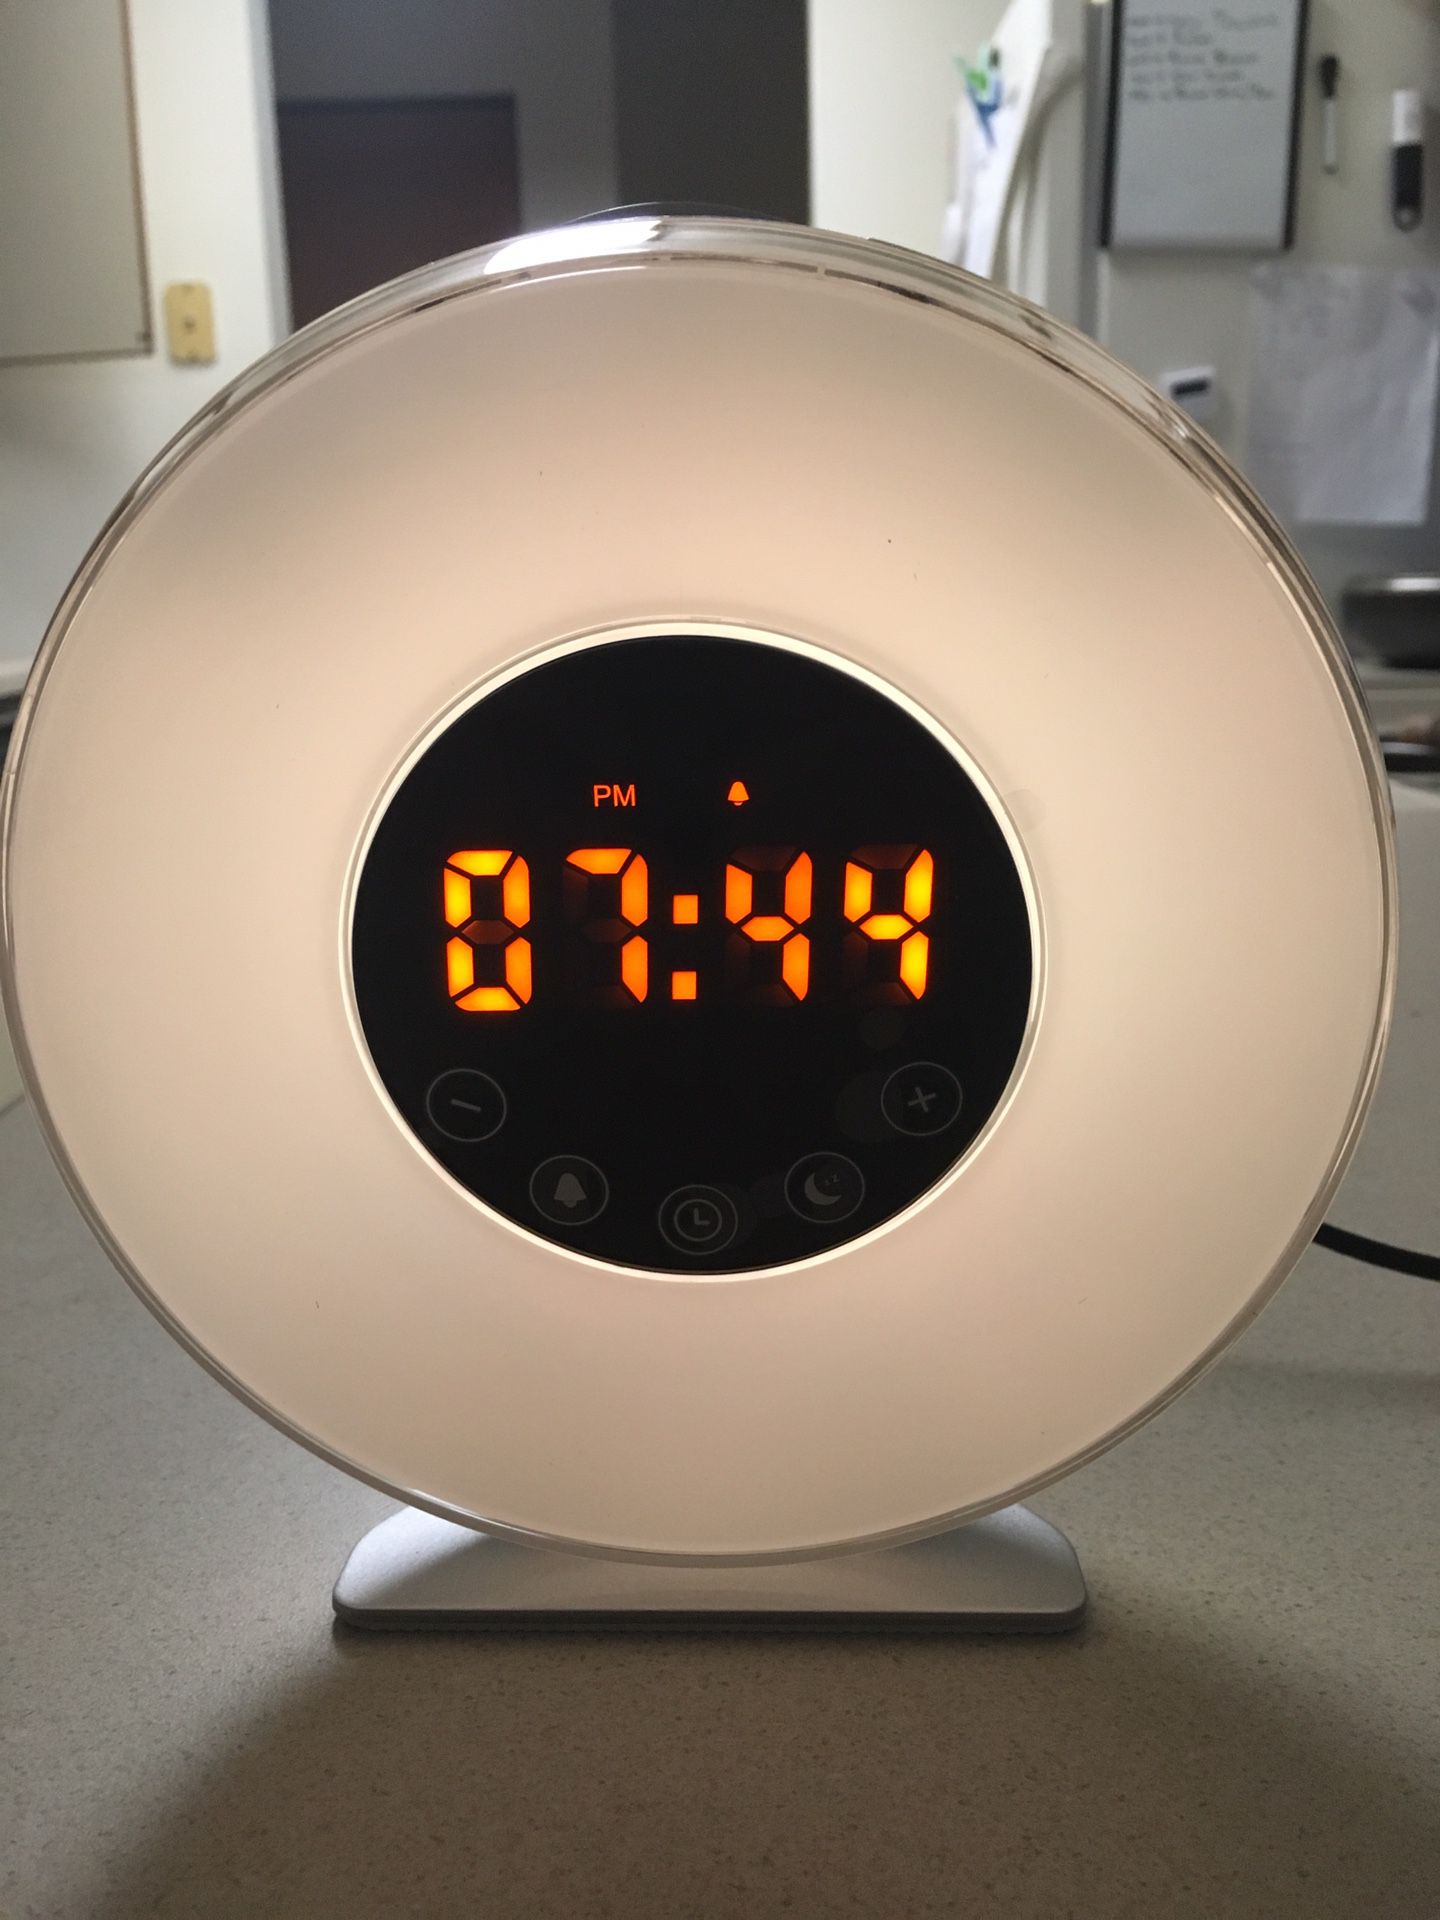 Alarm Clock with sunrise wake up..gradually wakes you up with soothing sunlight simulation. FM radio function also available for waking up or just pl